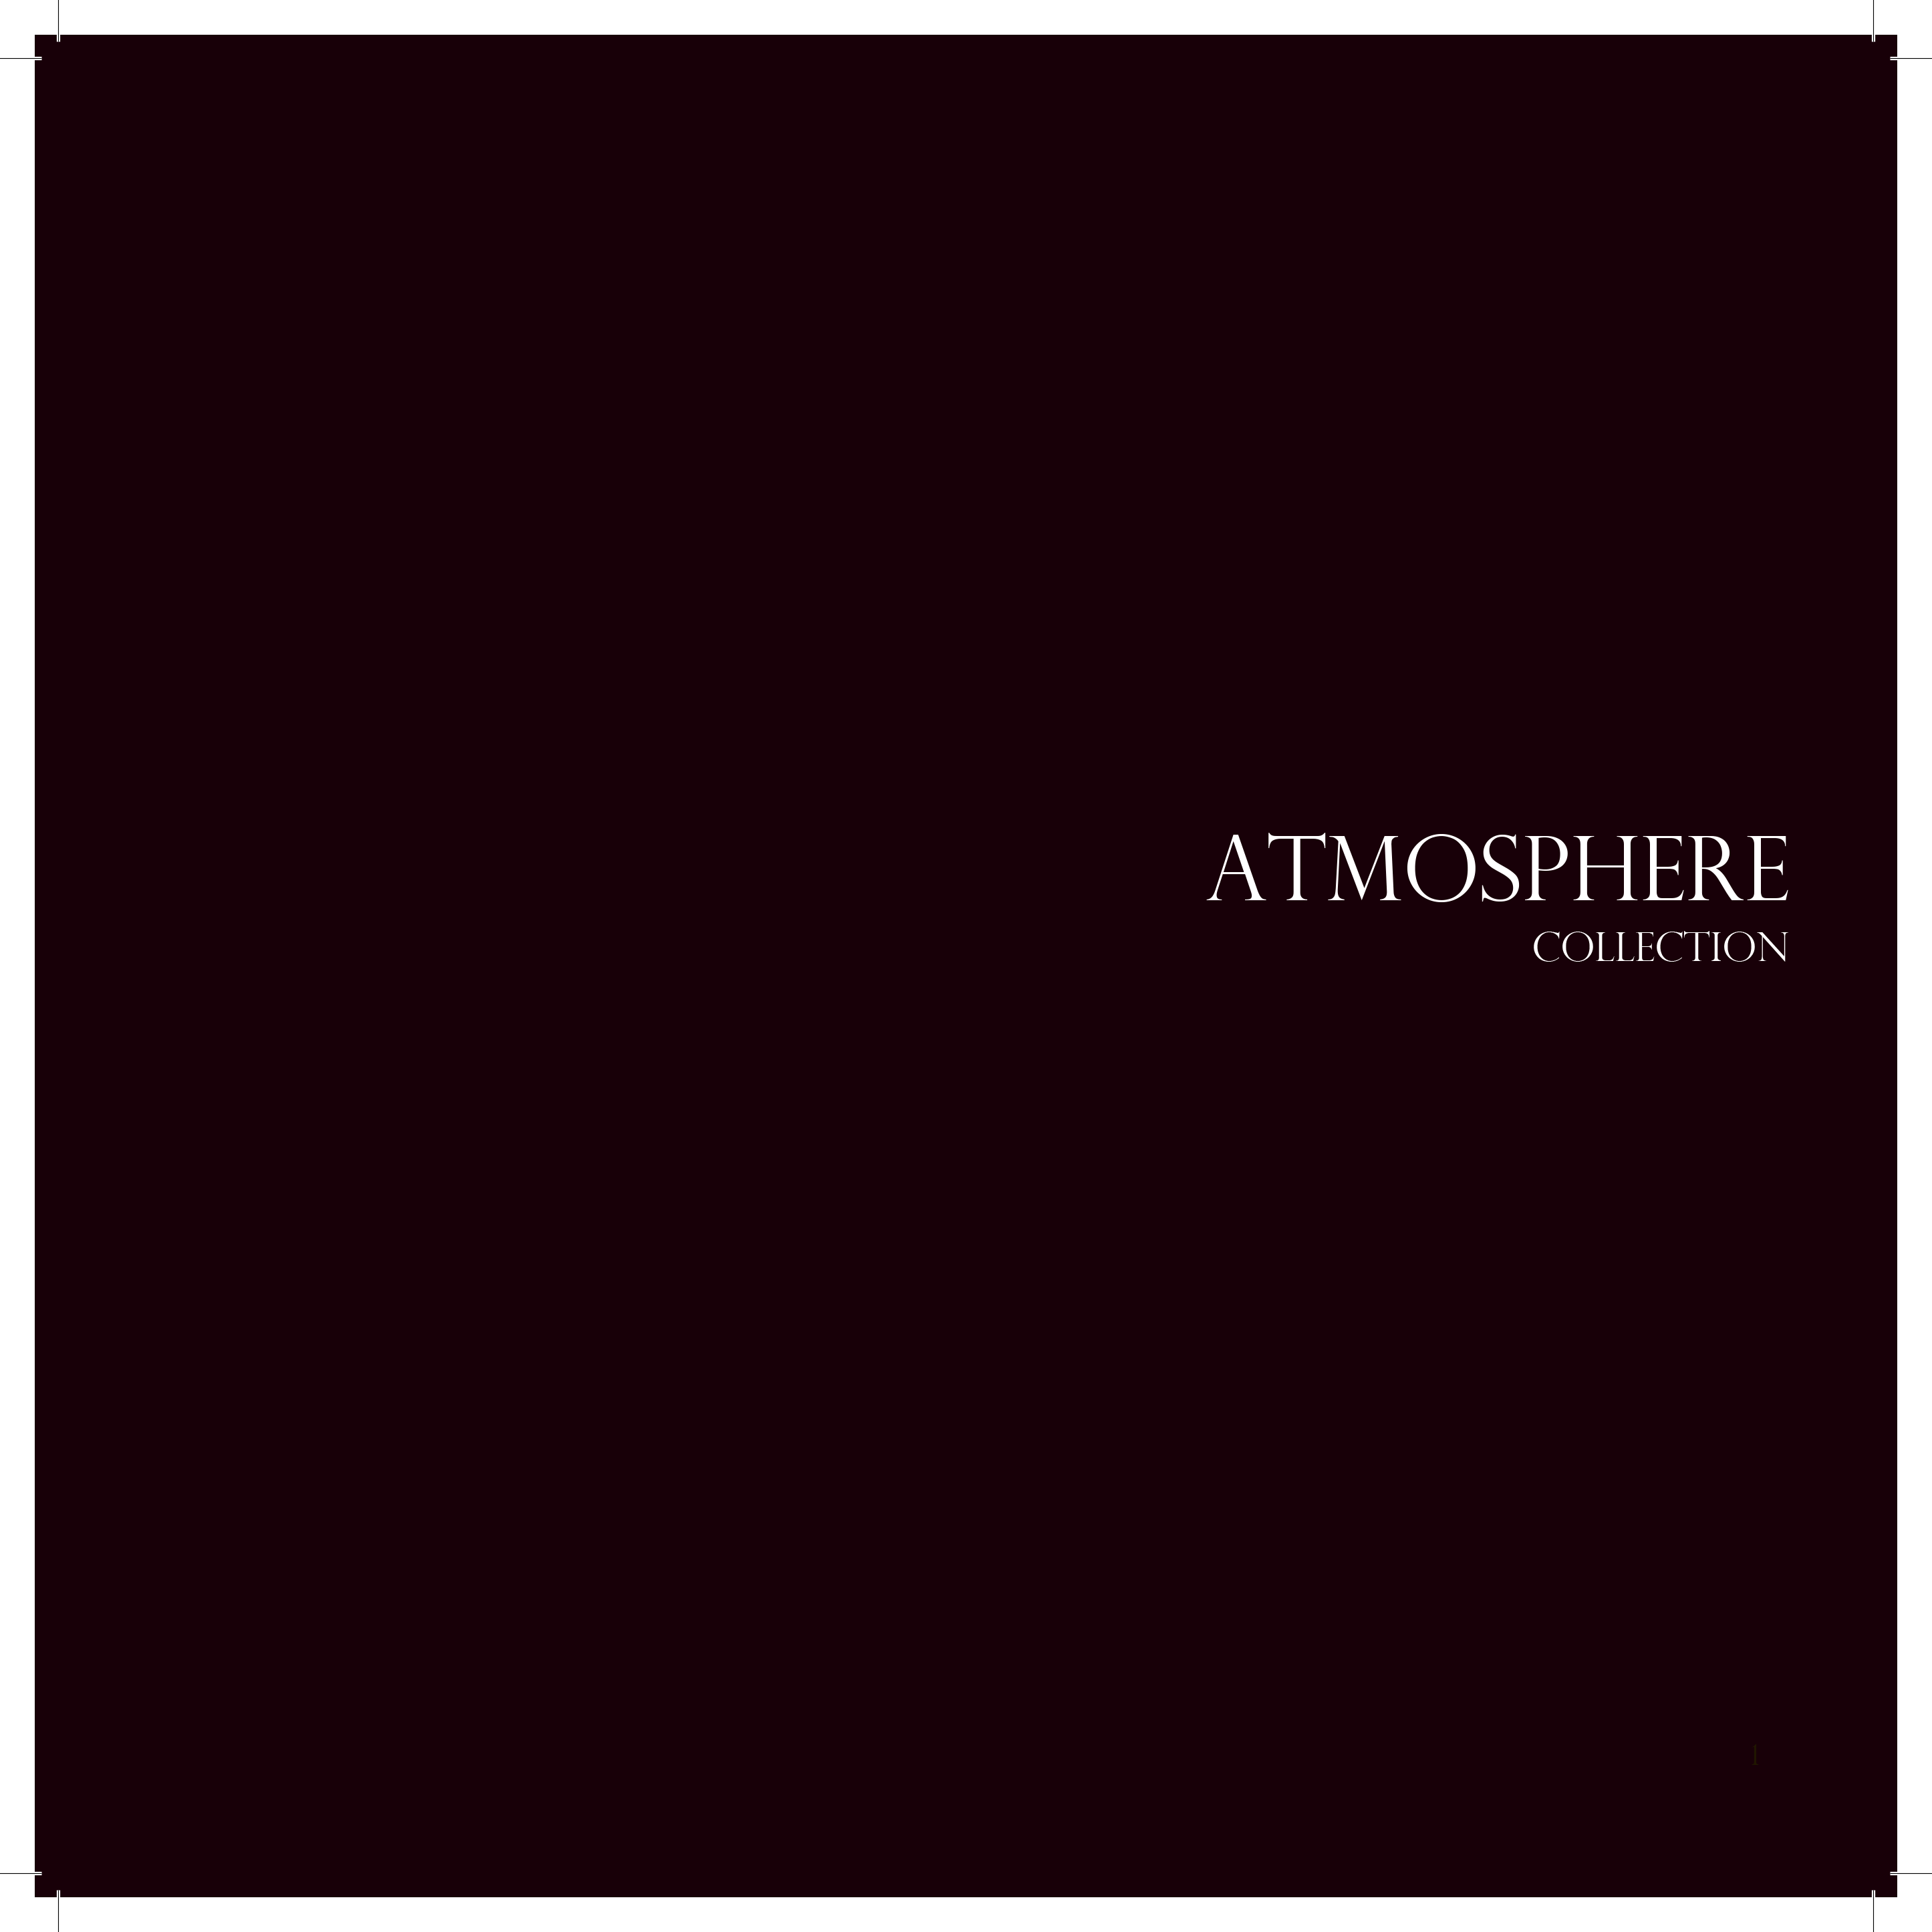 ATMOSPHERE COLLECTION